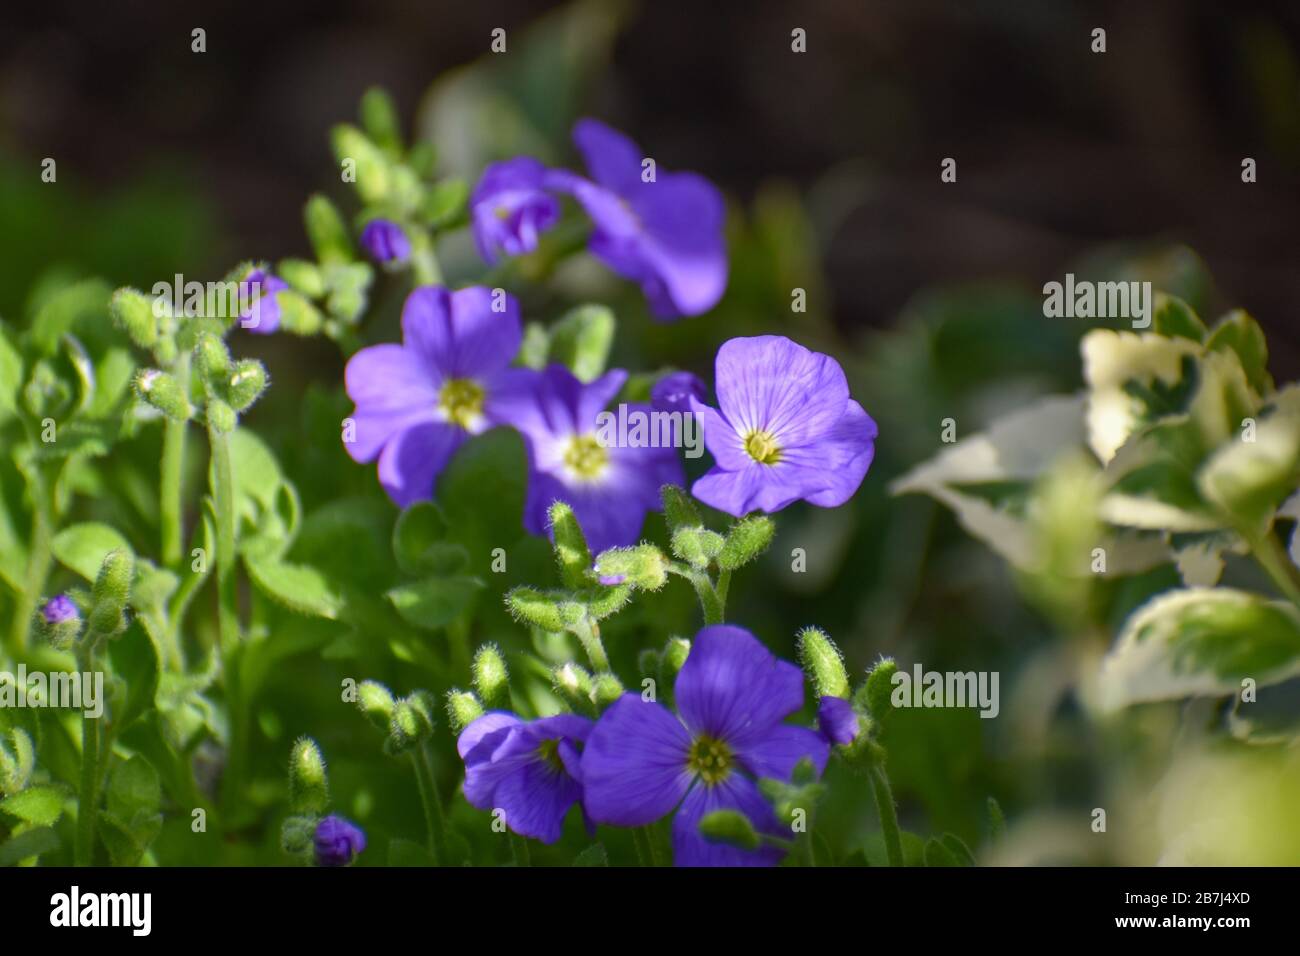 A close view of beautiful light purple blue aubretia flowers against green leaves in Spring Stock Photo